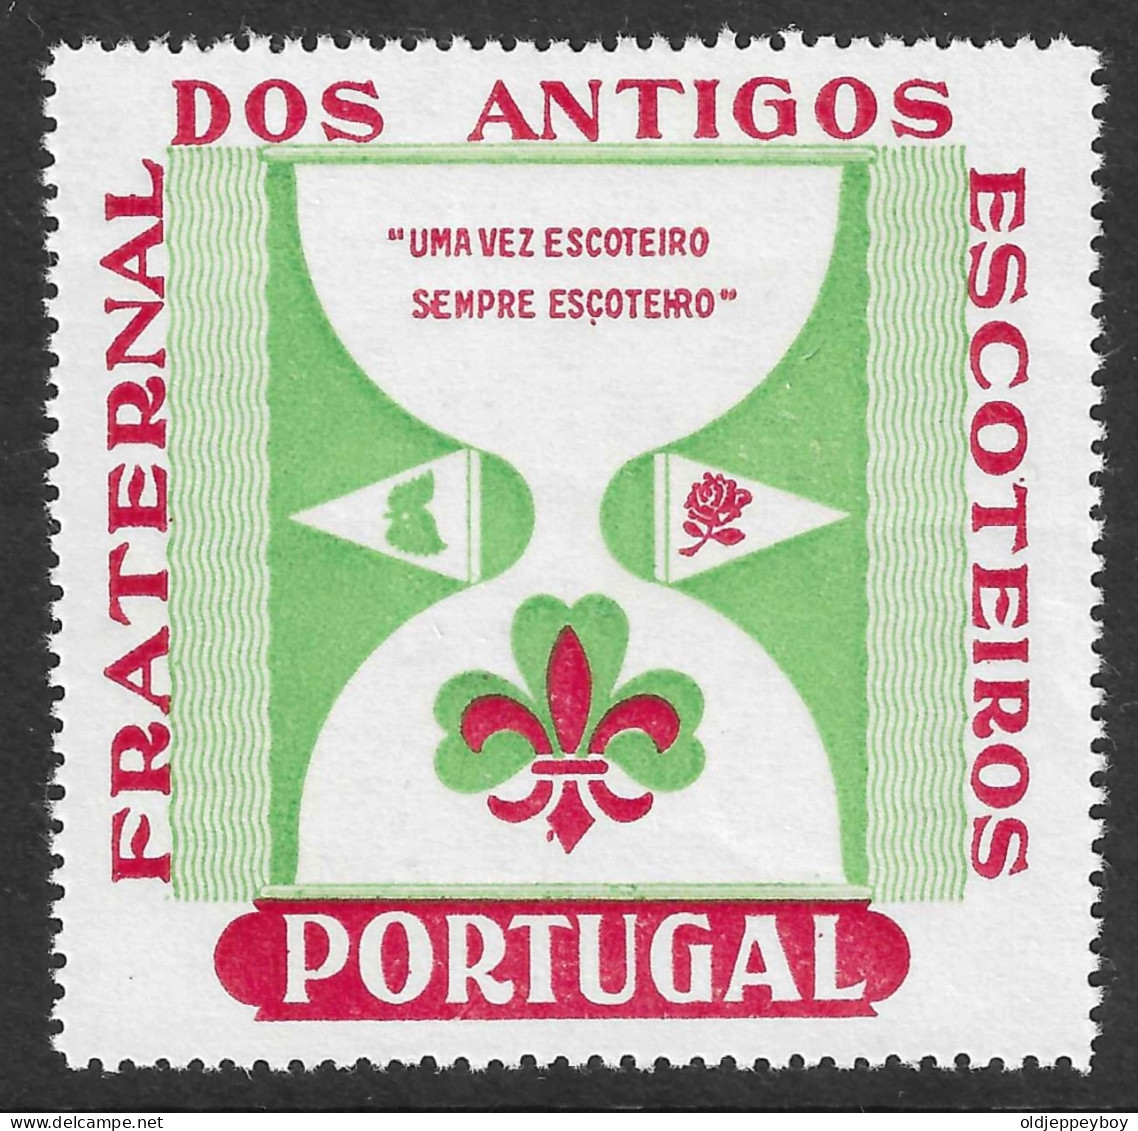 PORTUGAL Fraternal Antigos Escoteiros Anciens Scouts Fraternel Scoutisme Scouting Pfadfinder Scouts VIGNETTE CINDERELLA  - Unused Stamps